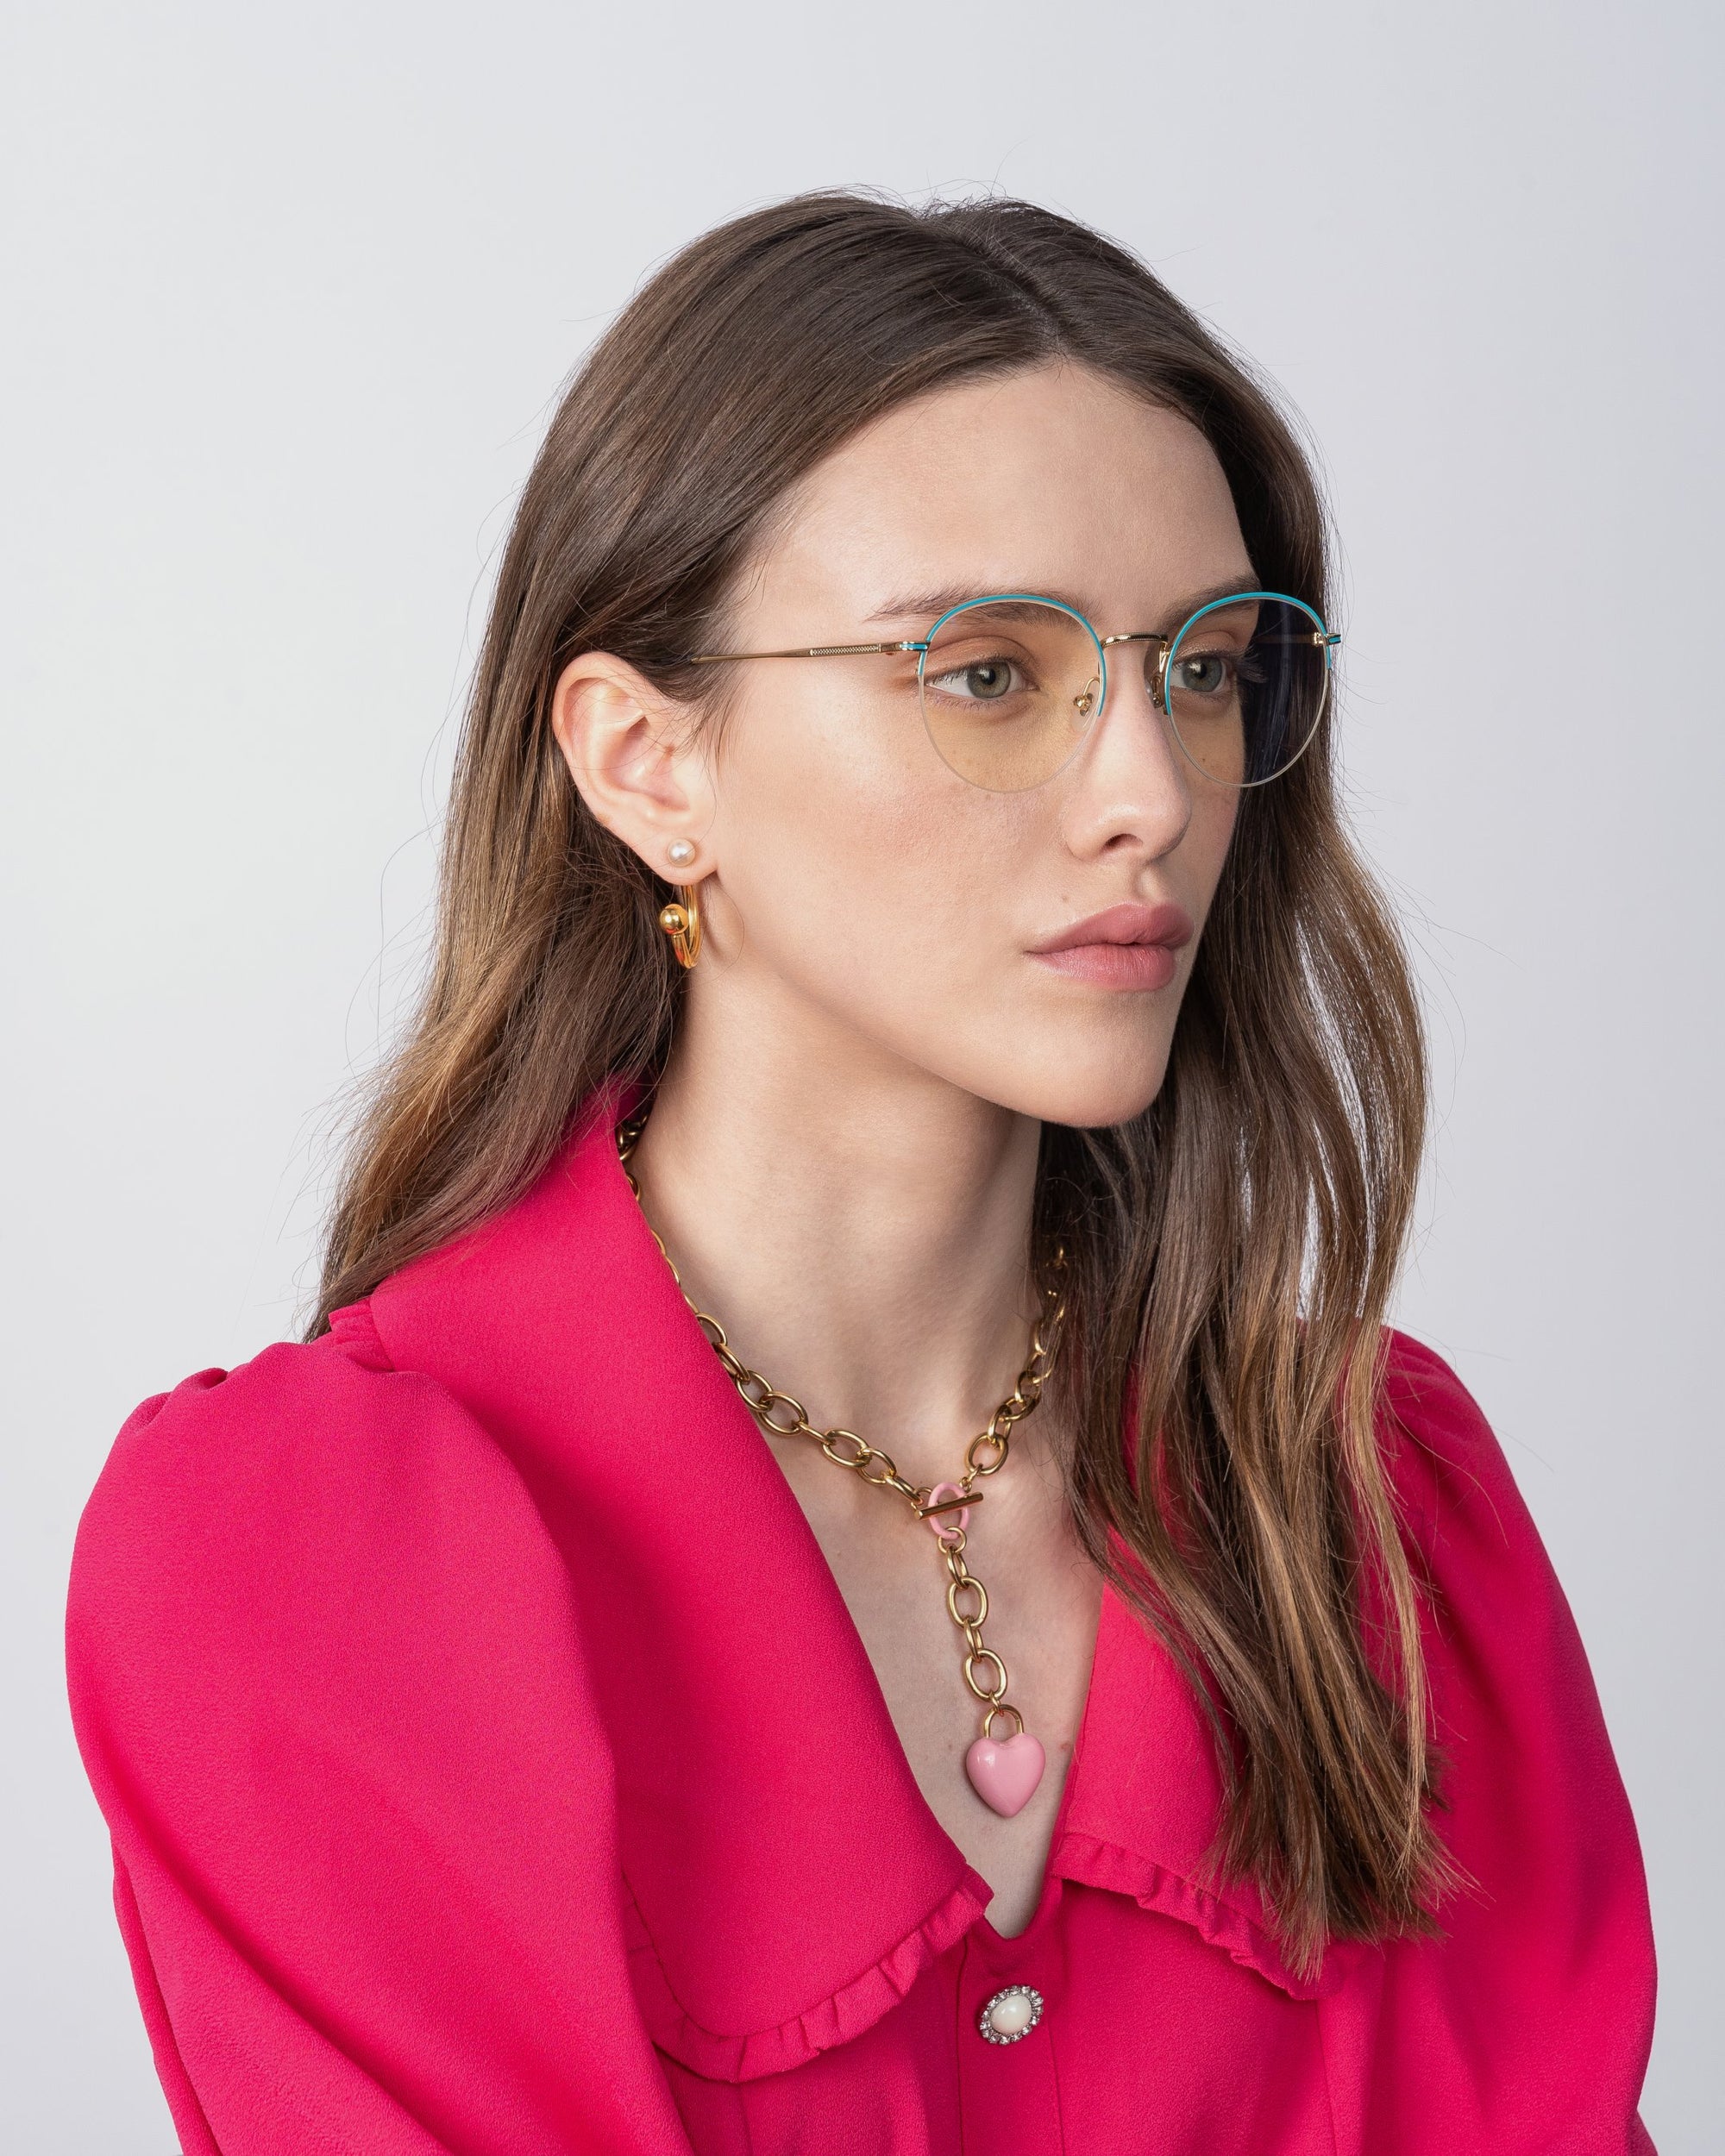 A woman with long, brown hair is wearing For Art's Sake® Ivy glasses with blue light filter lenses, a bright pink blouse with puff sleeves, and a gold necklace with a pink heart pendant. She is looking slightly to the side with a neutral expression against a plain white background.